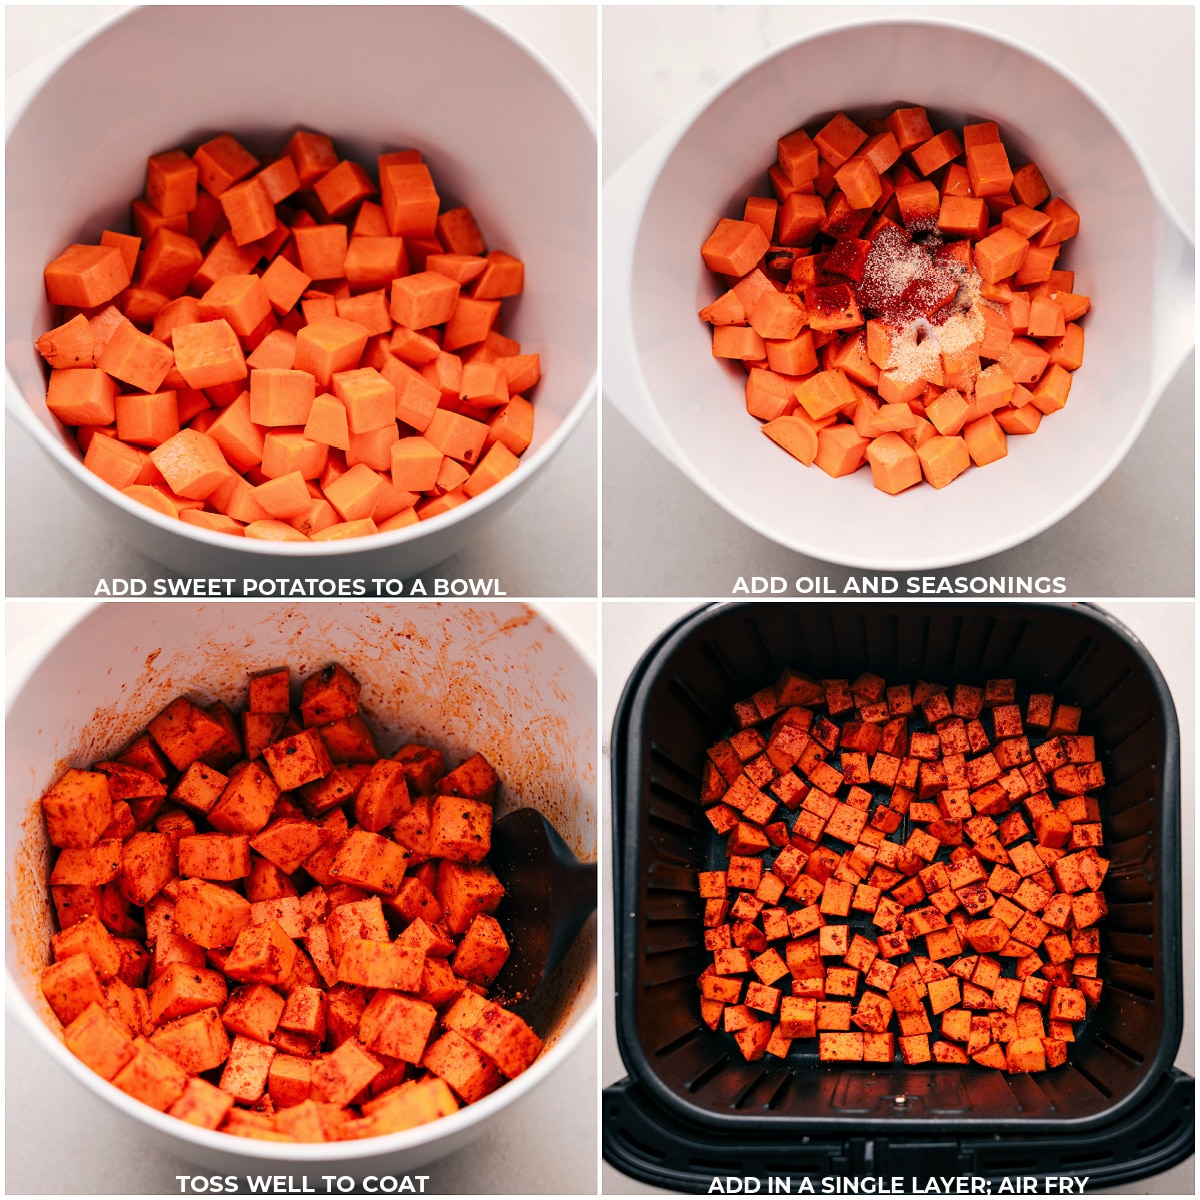 Images showing the sweet potatoes chopped, prepped, and added to the air fryer for this recipe